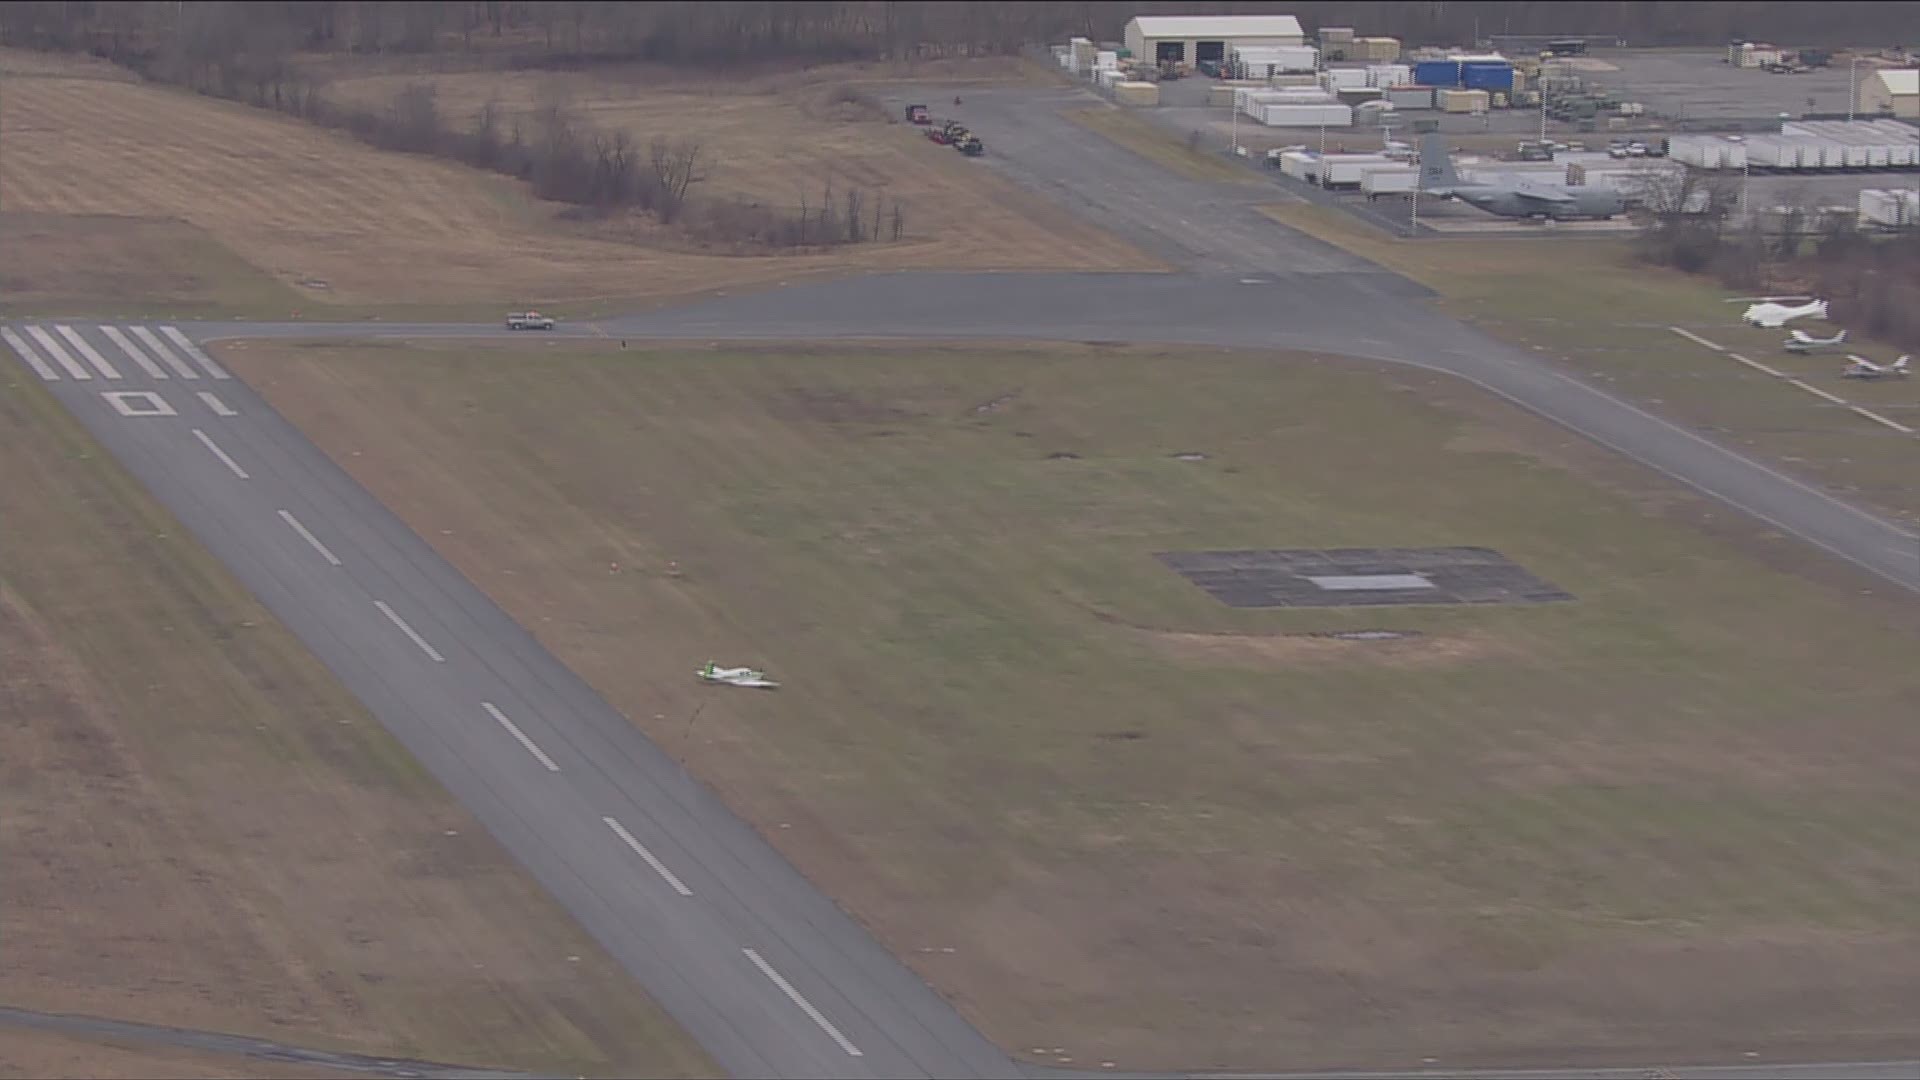 A single-engine aircraft skidded off the runway at Tipton Airport.